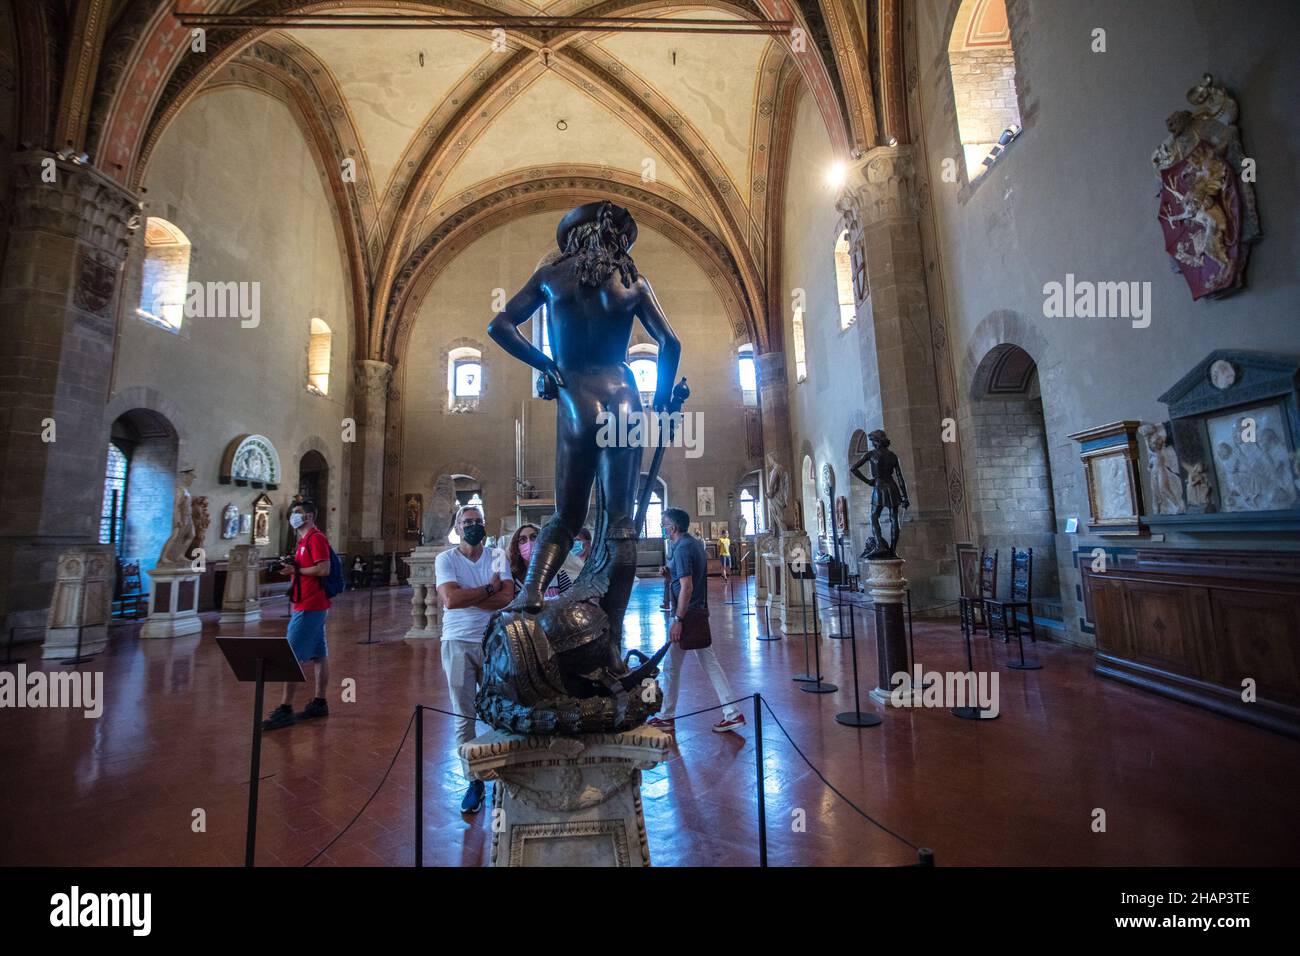 The Bargello National Museum, also known as Palazzo del Bargello, is an art museum in Florence. It houses the statue David by Donatello. Stock Photo